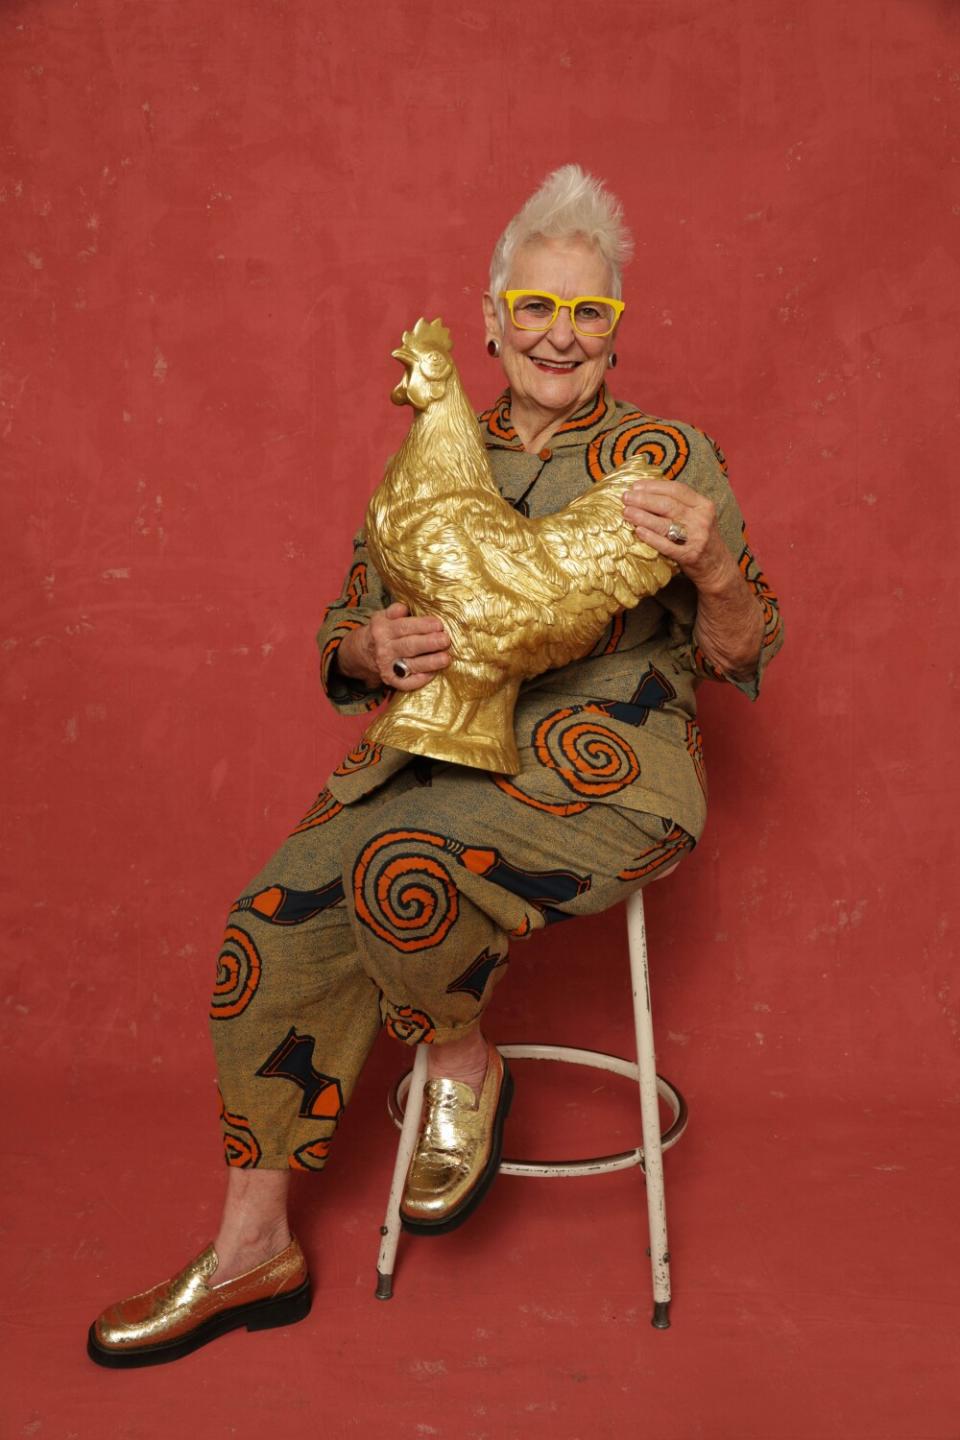 l.a.Eyeworks co-founder Gai Gherardi sitting on a stool in front of a red backdrop holding a gold rooster